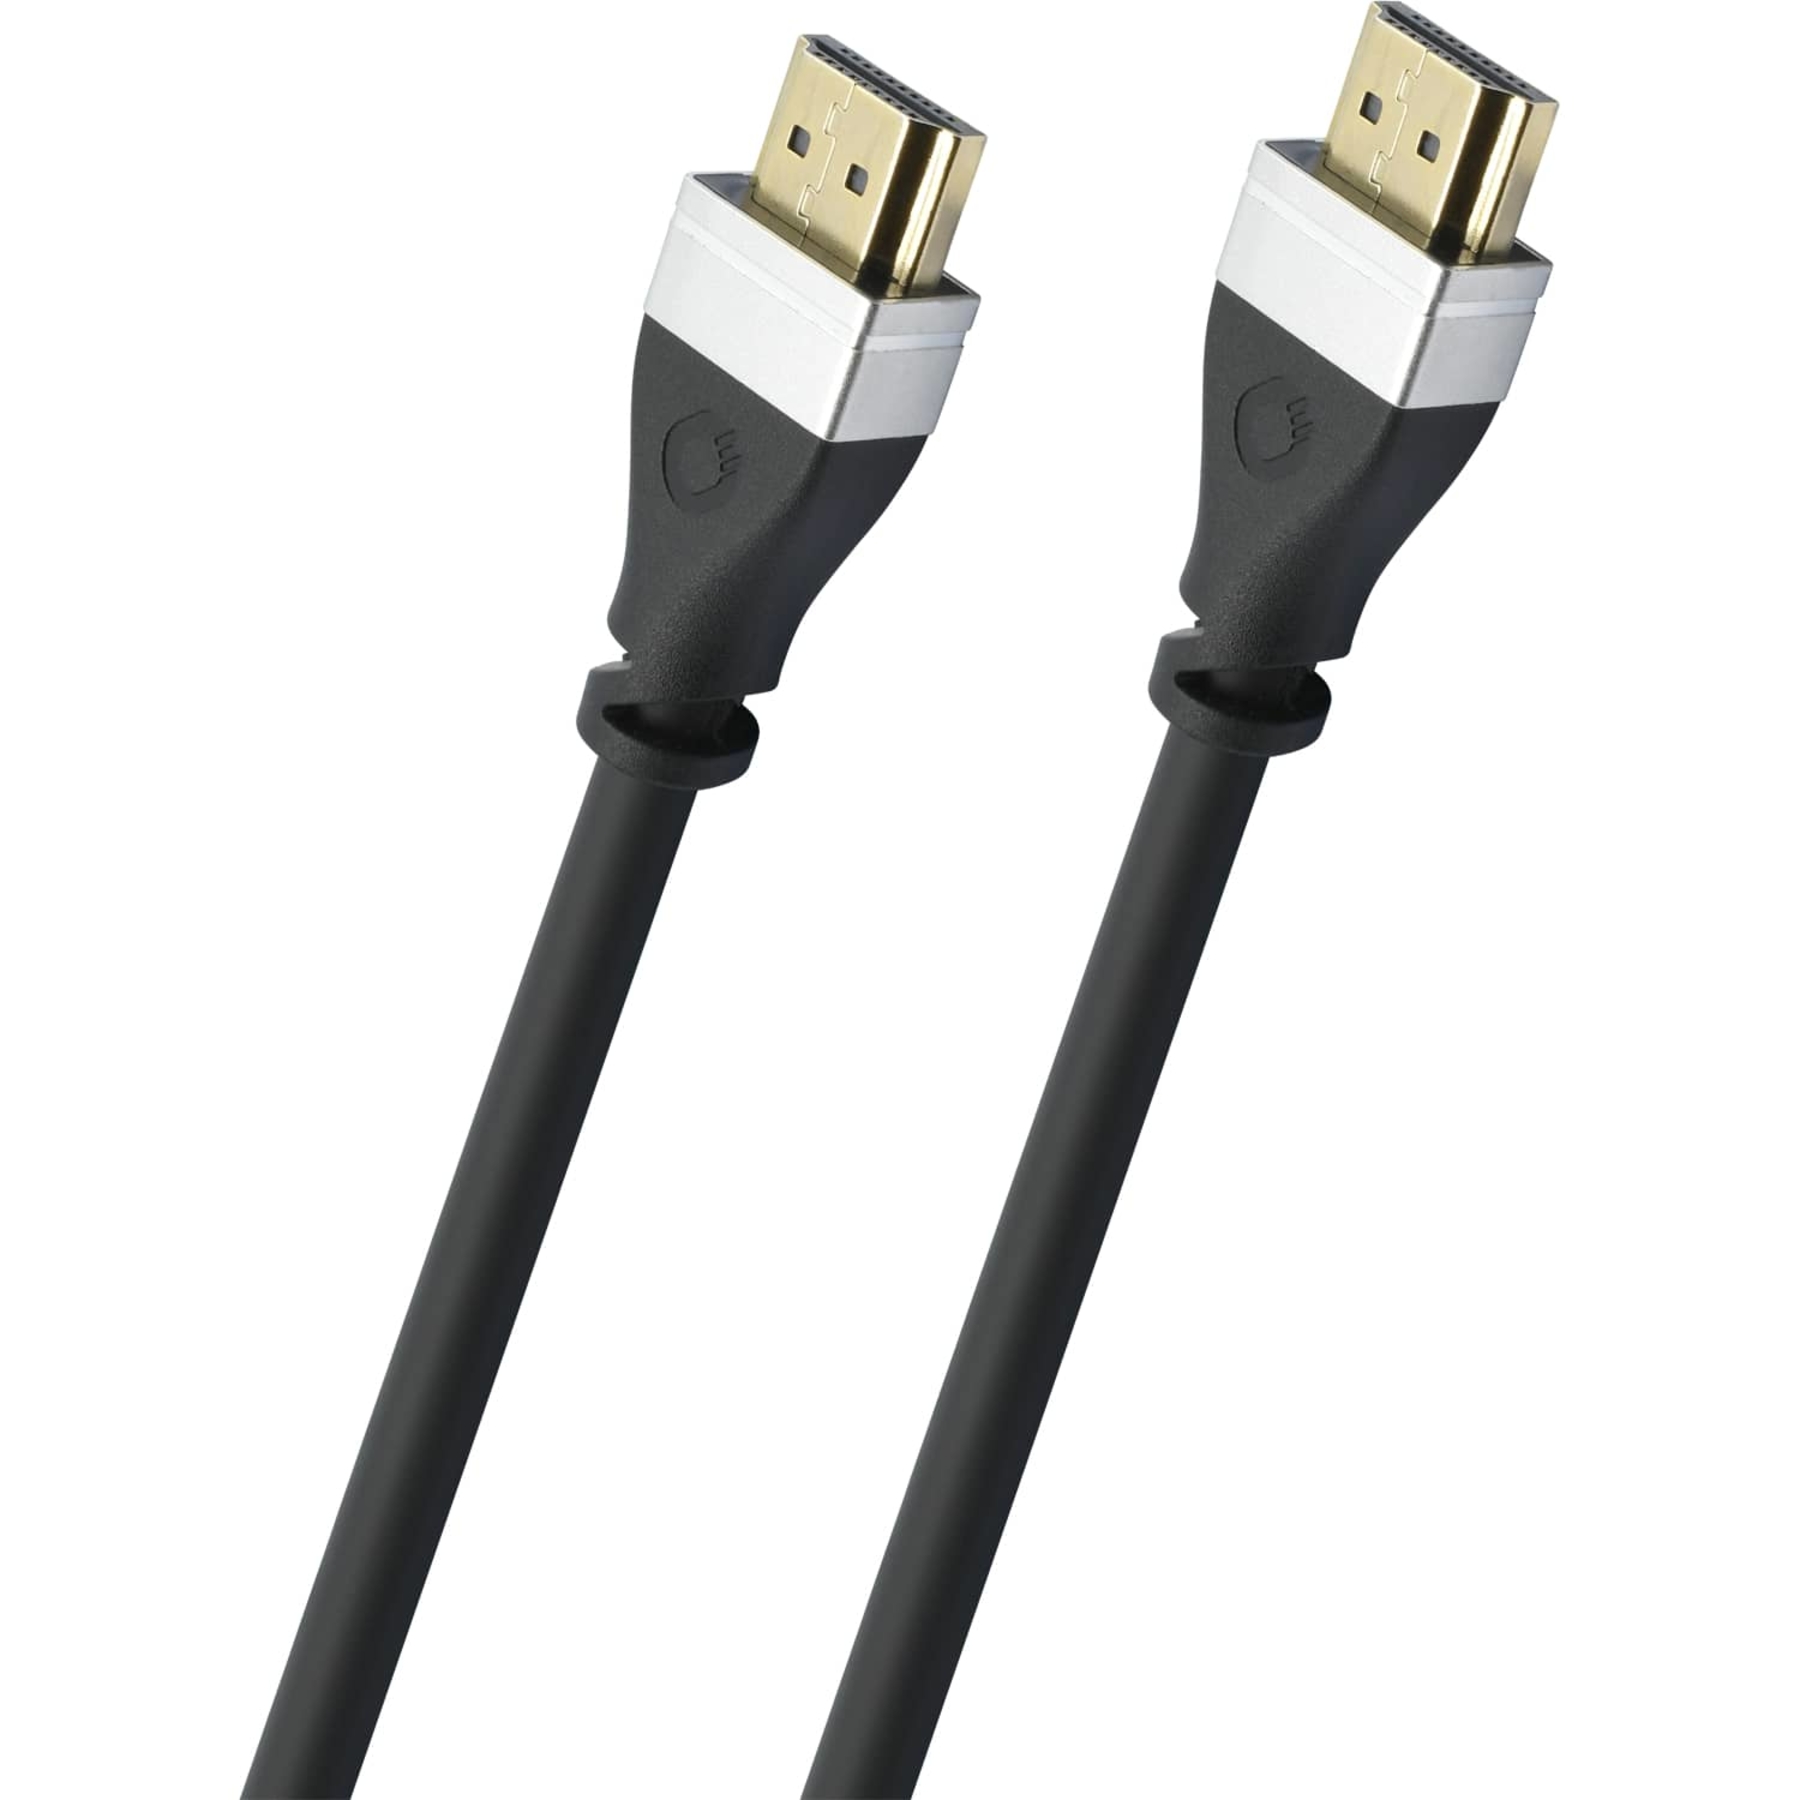 HDMI кабели Oehlbach EXCELLENCE Select Video Link, UHS HDMI 2.1, 5.0m black, D1C33104 hdmi кабели oehlbach select video link cable 3 0m 33103